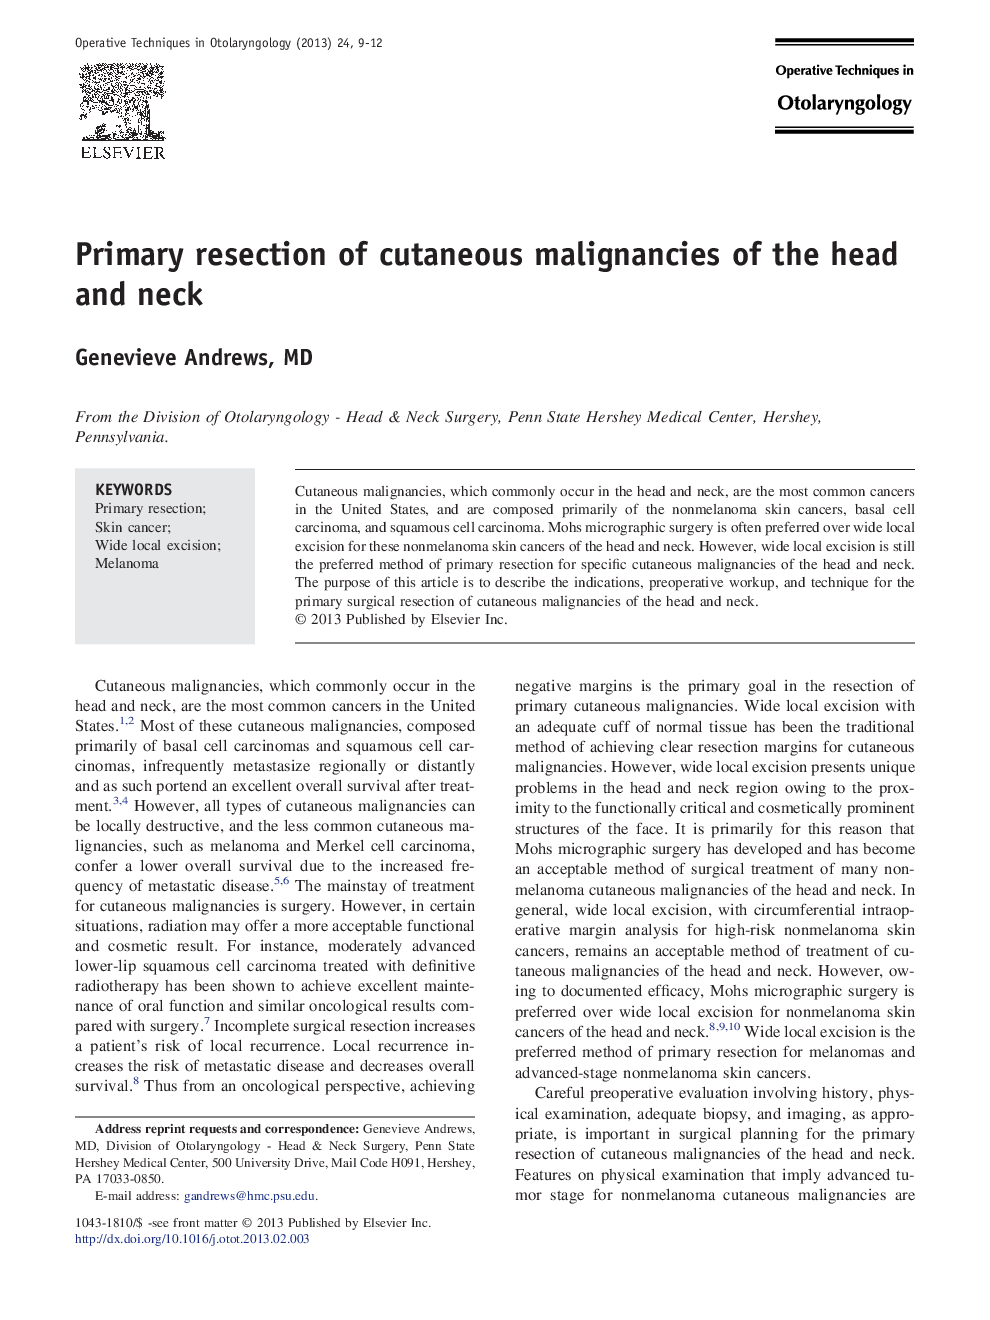 Primary resection of cutaneous malignancies of the head and neck